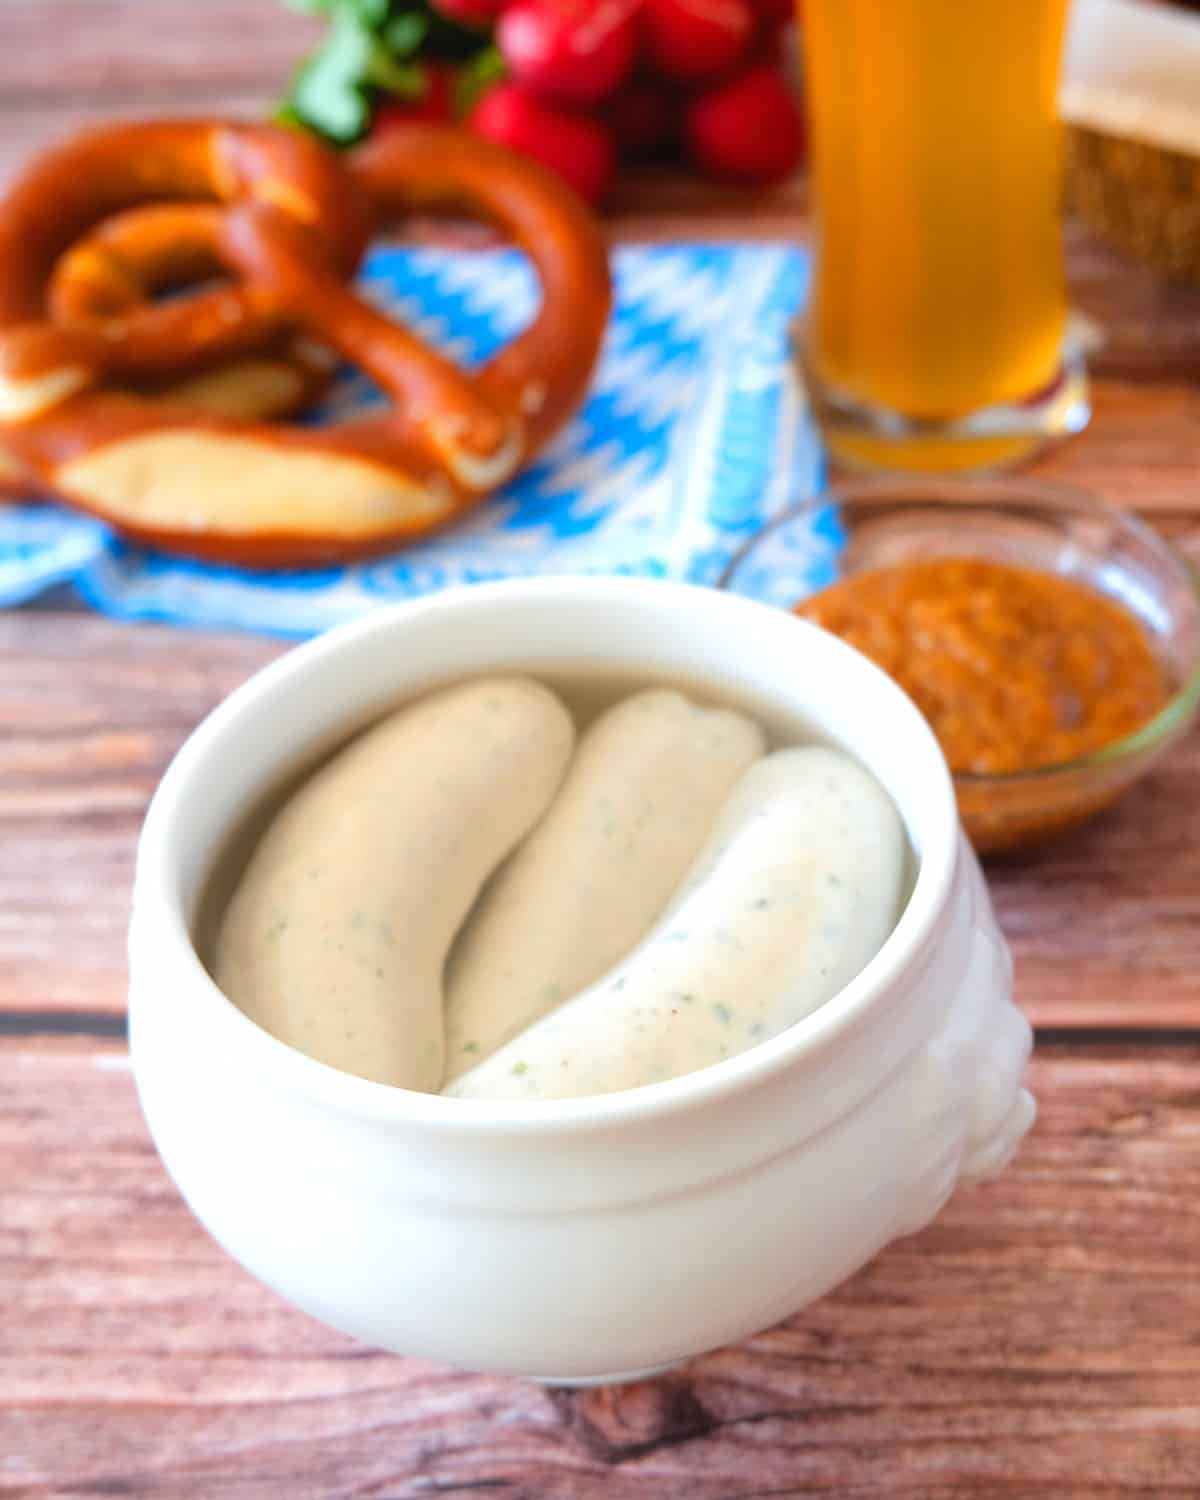 weisswurst in a bowl